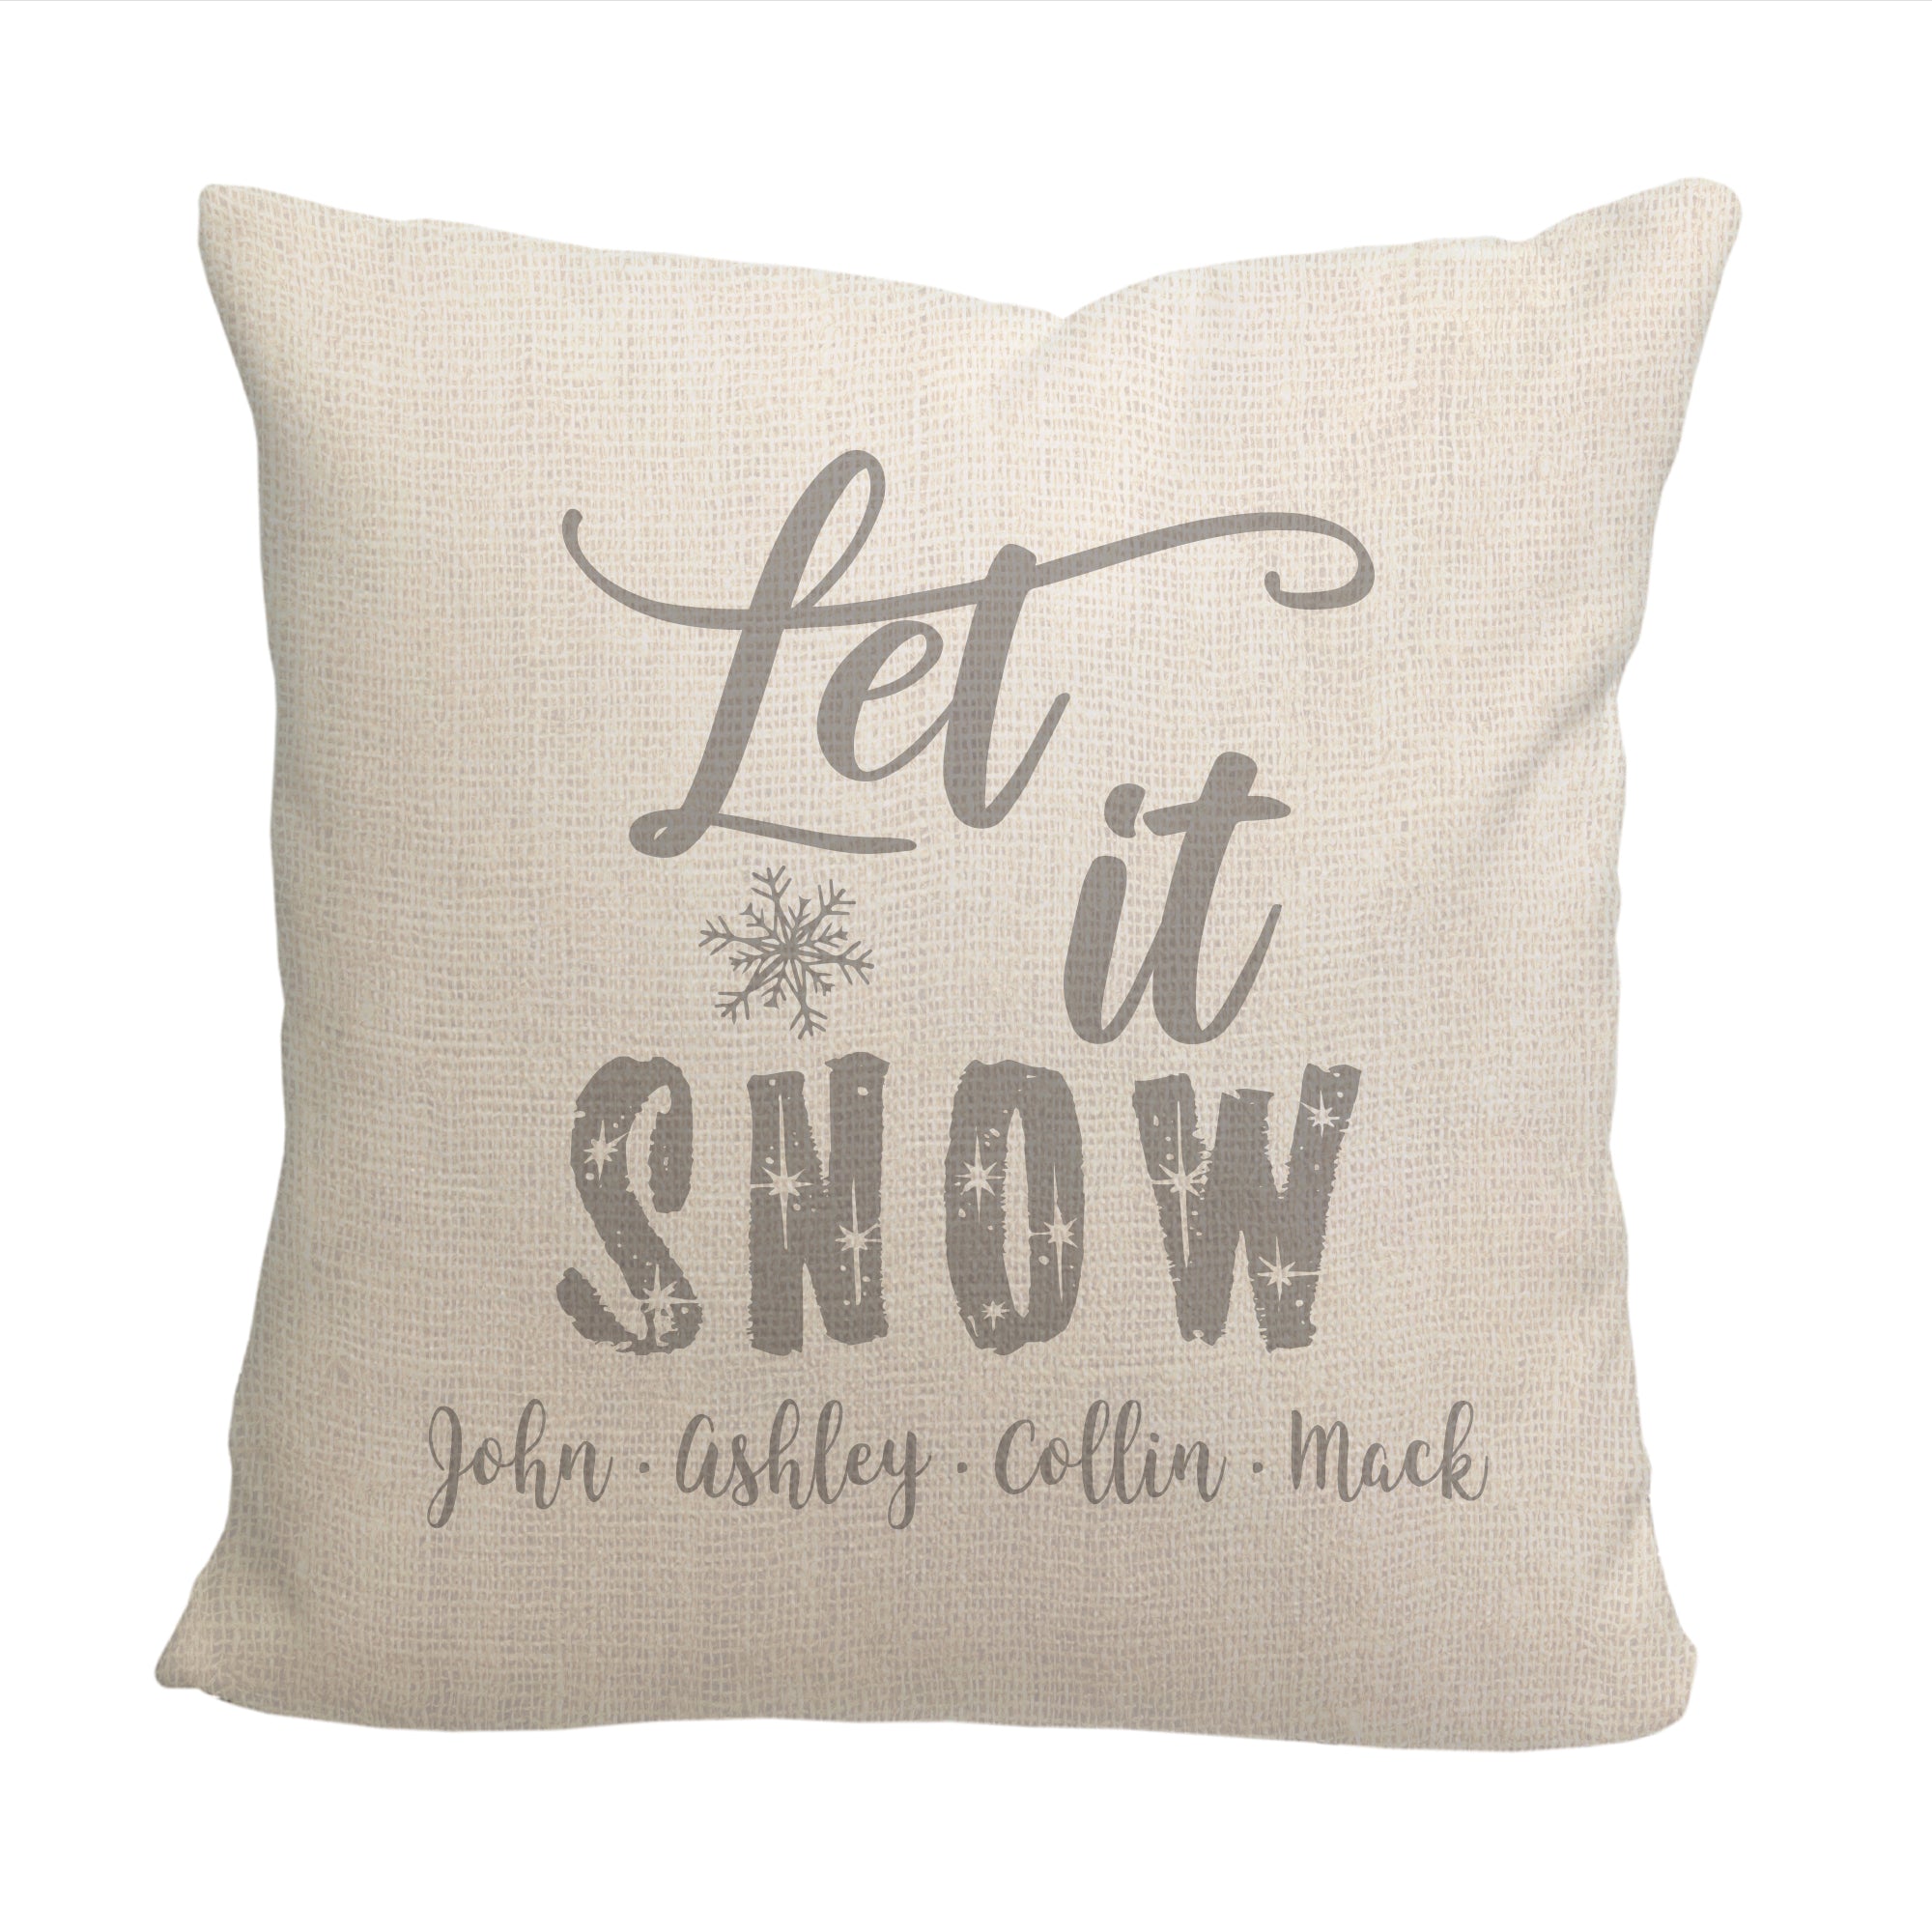 Let it Snow Throw Pillow - Cover Only OR Cover with Insert